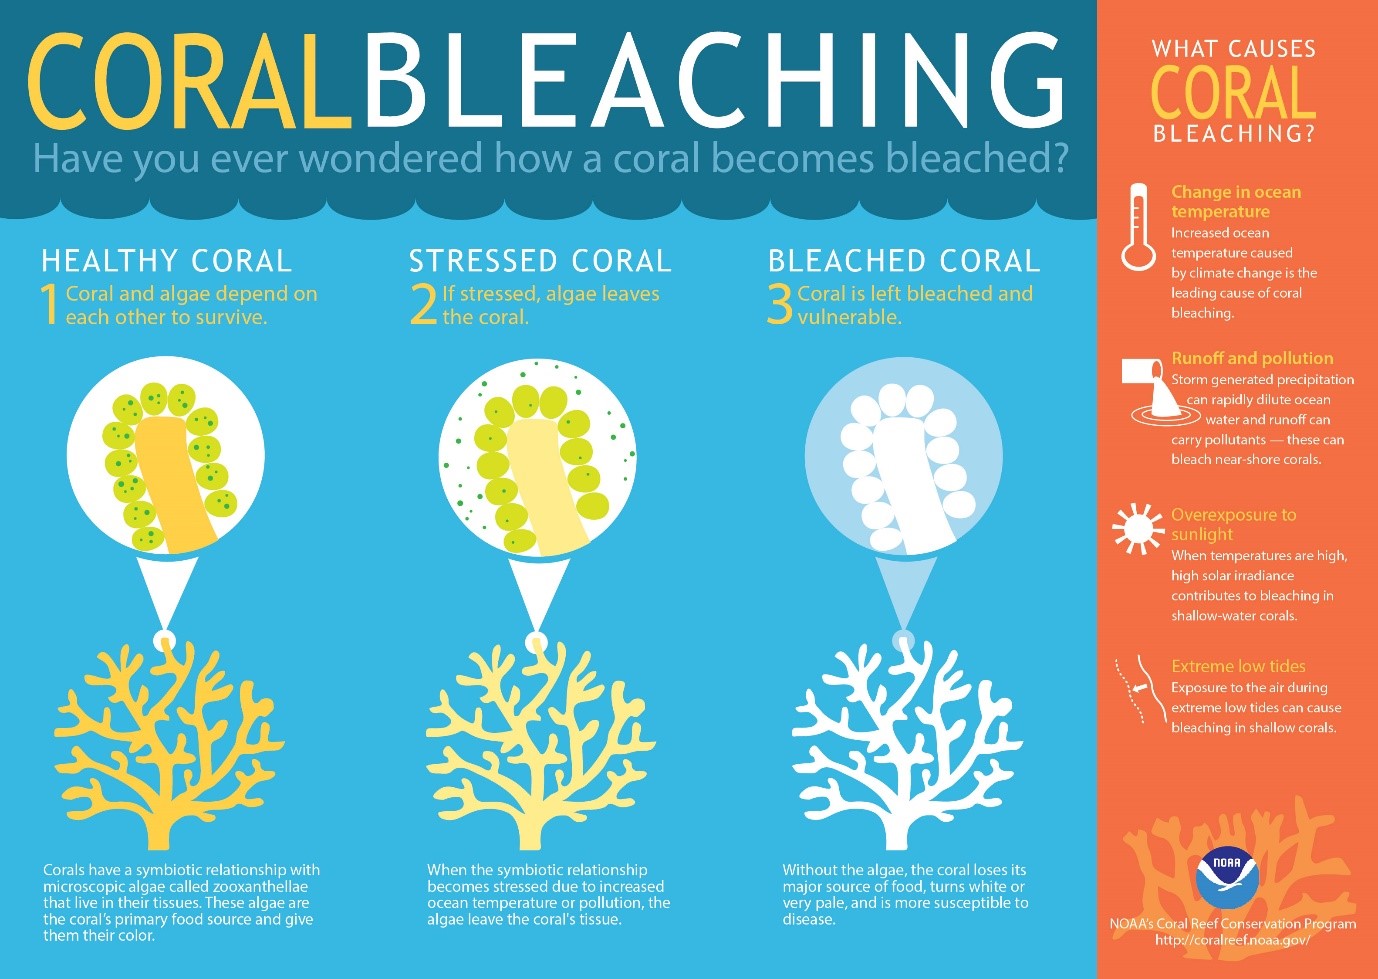 Figure 5. Infographic explaining coral bleaching and its causes, source: http://oceanservice.noaa.gov/facts/coralbleaching-large.jpg